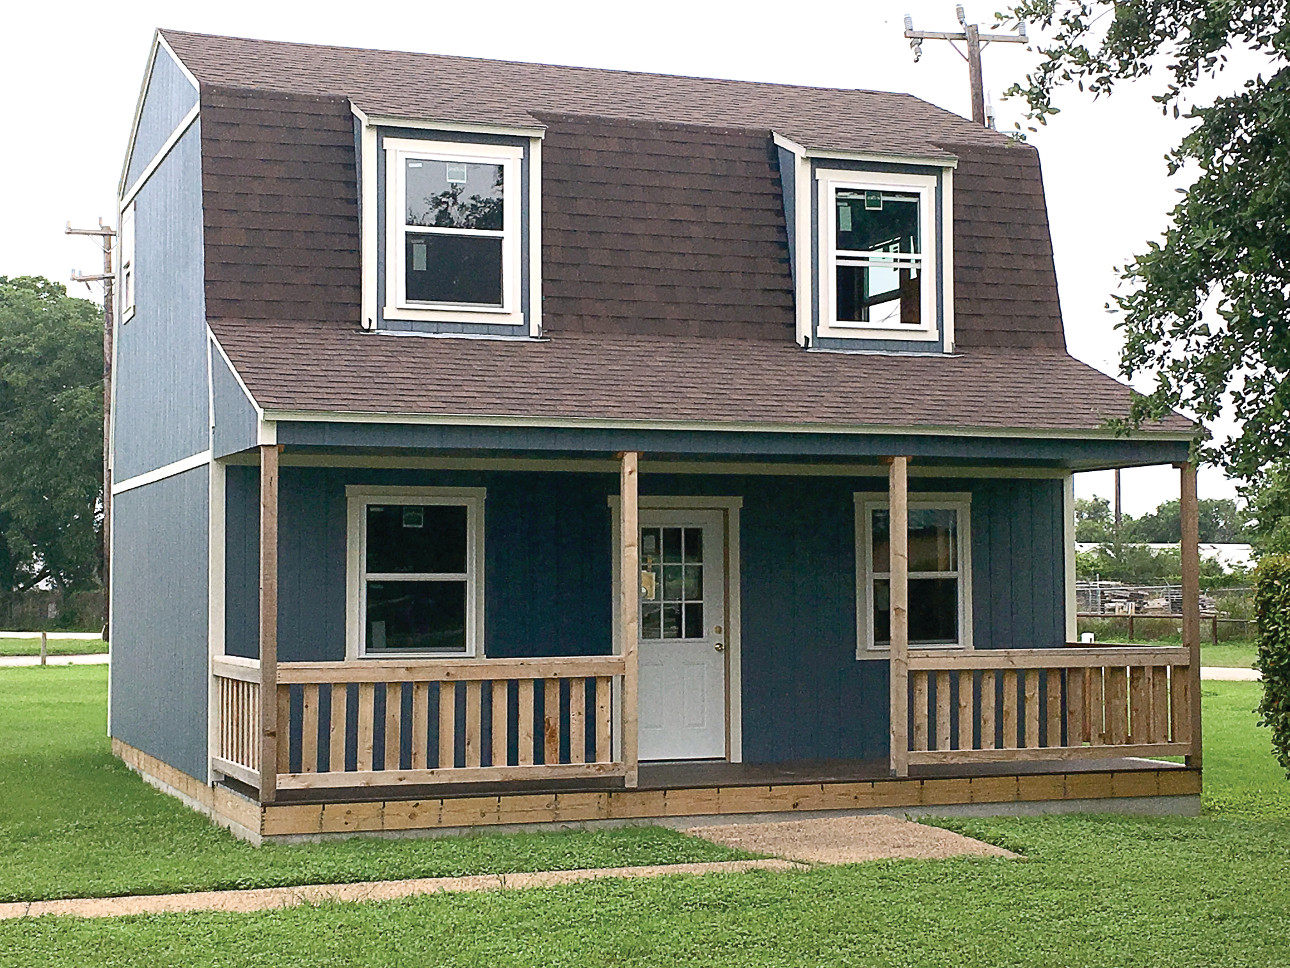 Man caves, ‘she sheds,’ cabins; Tuff Shed opens new retail ...